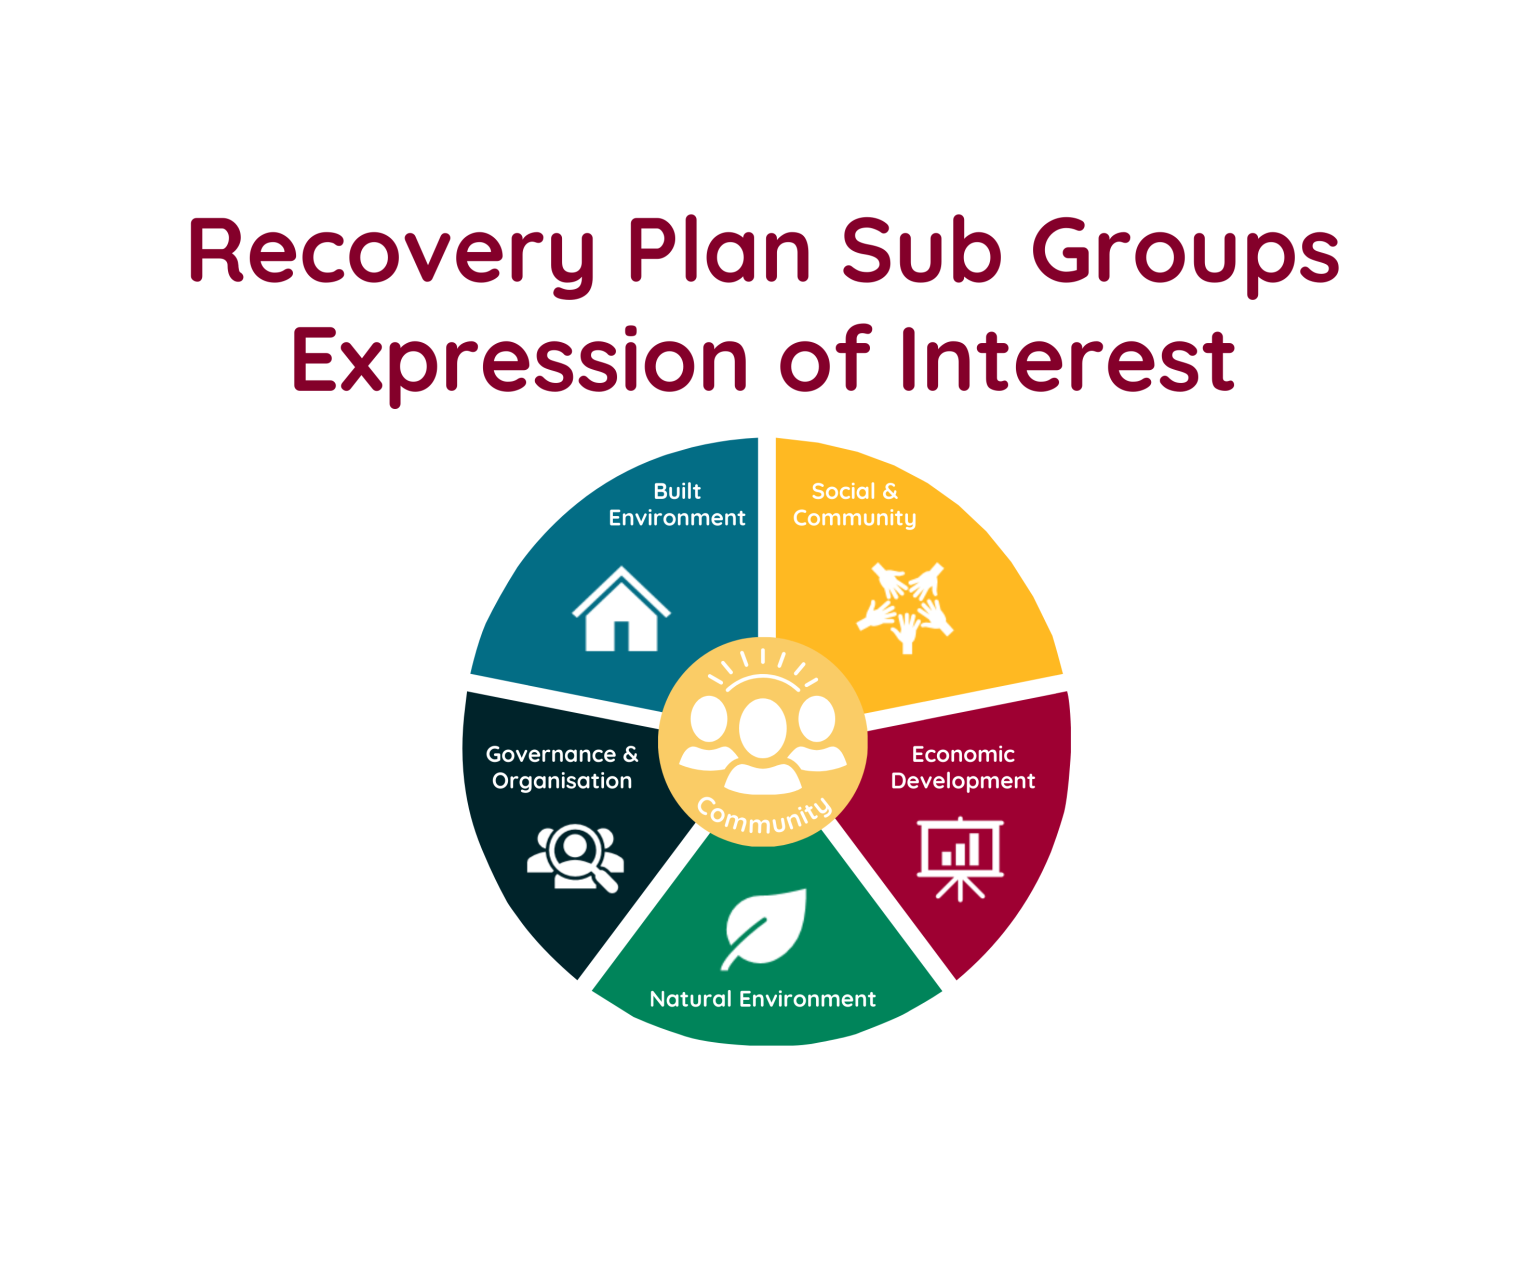 Recovery Plan Sub Groups - Expression of Interest